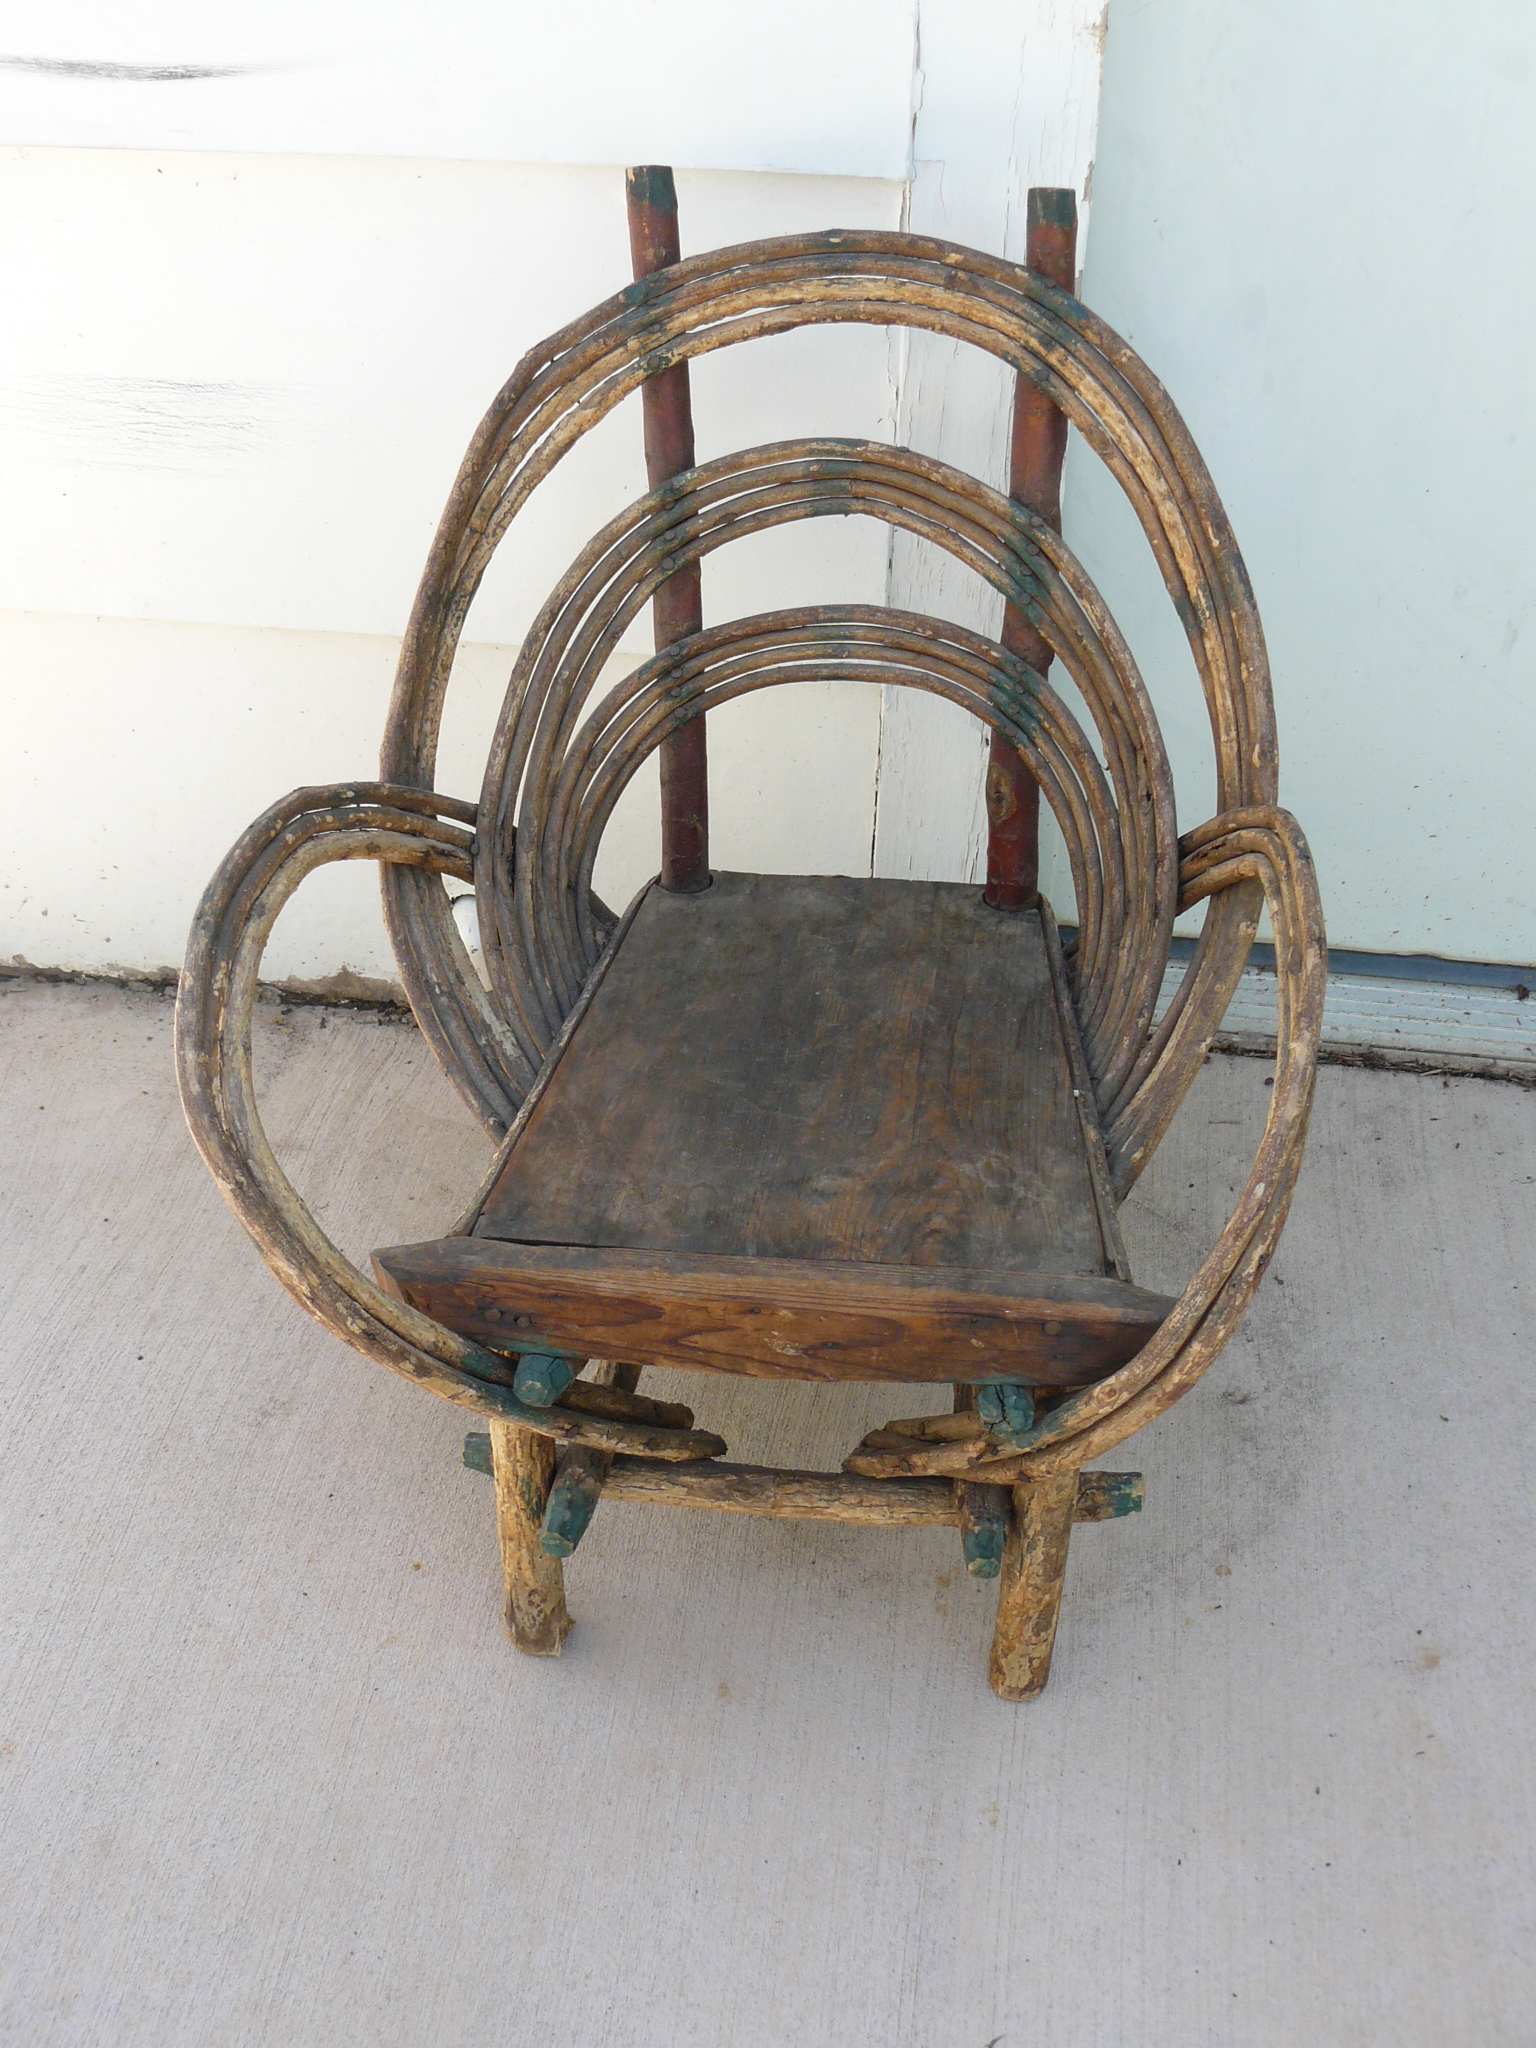 Child S Bent Twig Chair What Can You Tell Me Antiques Board